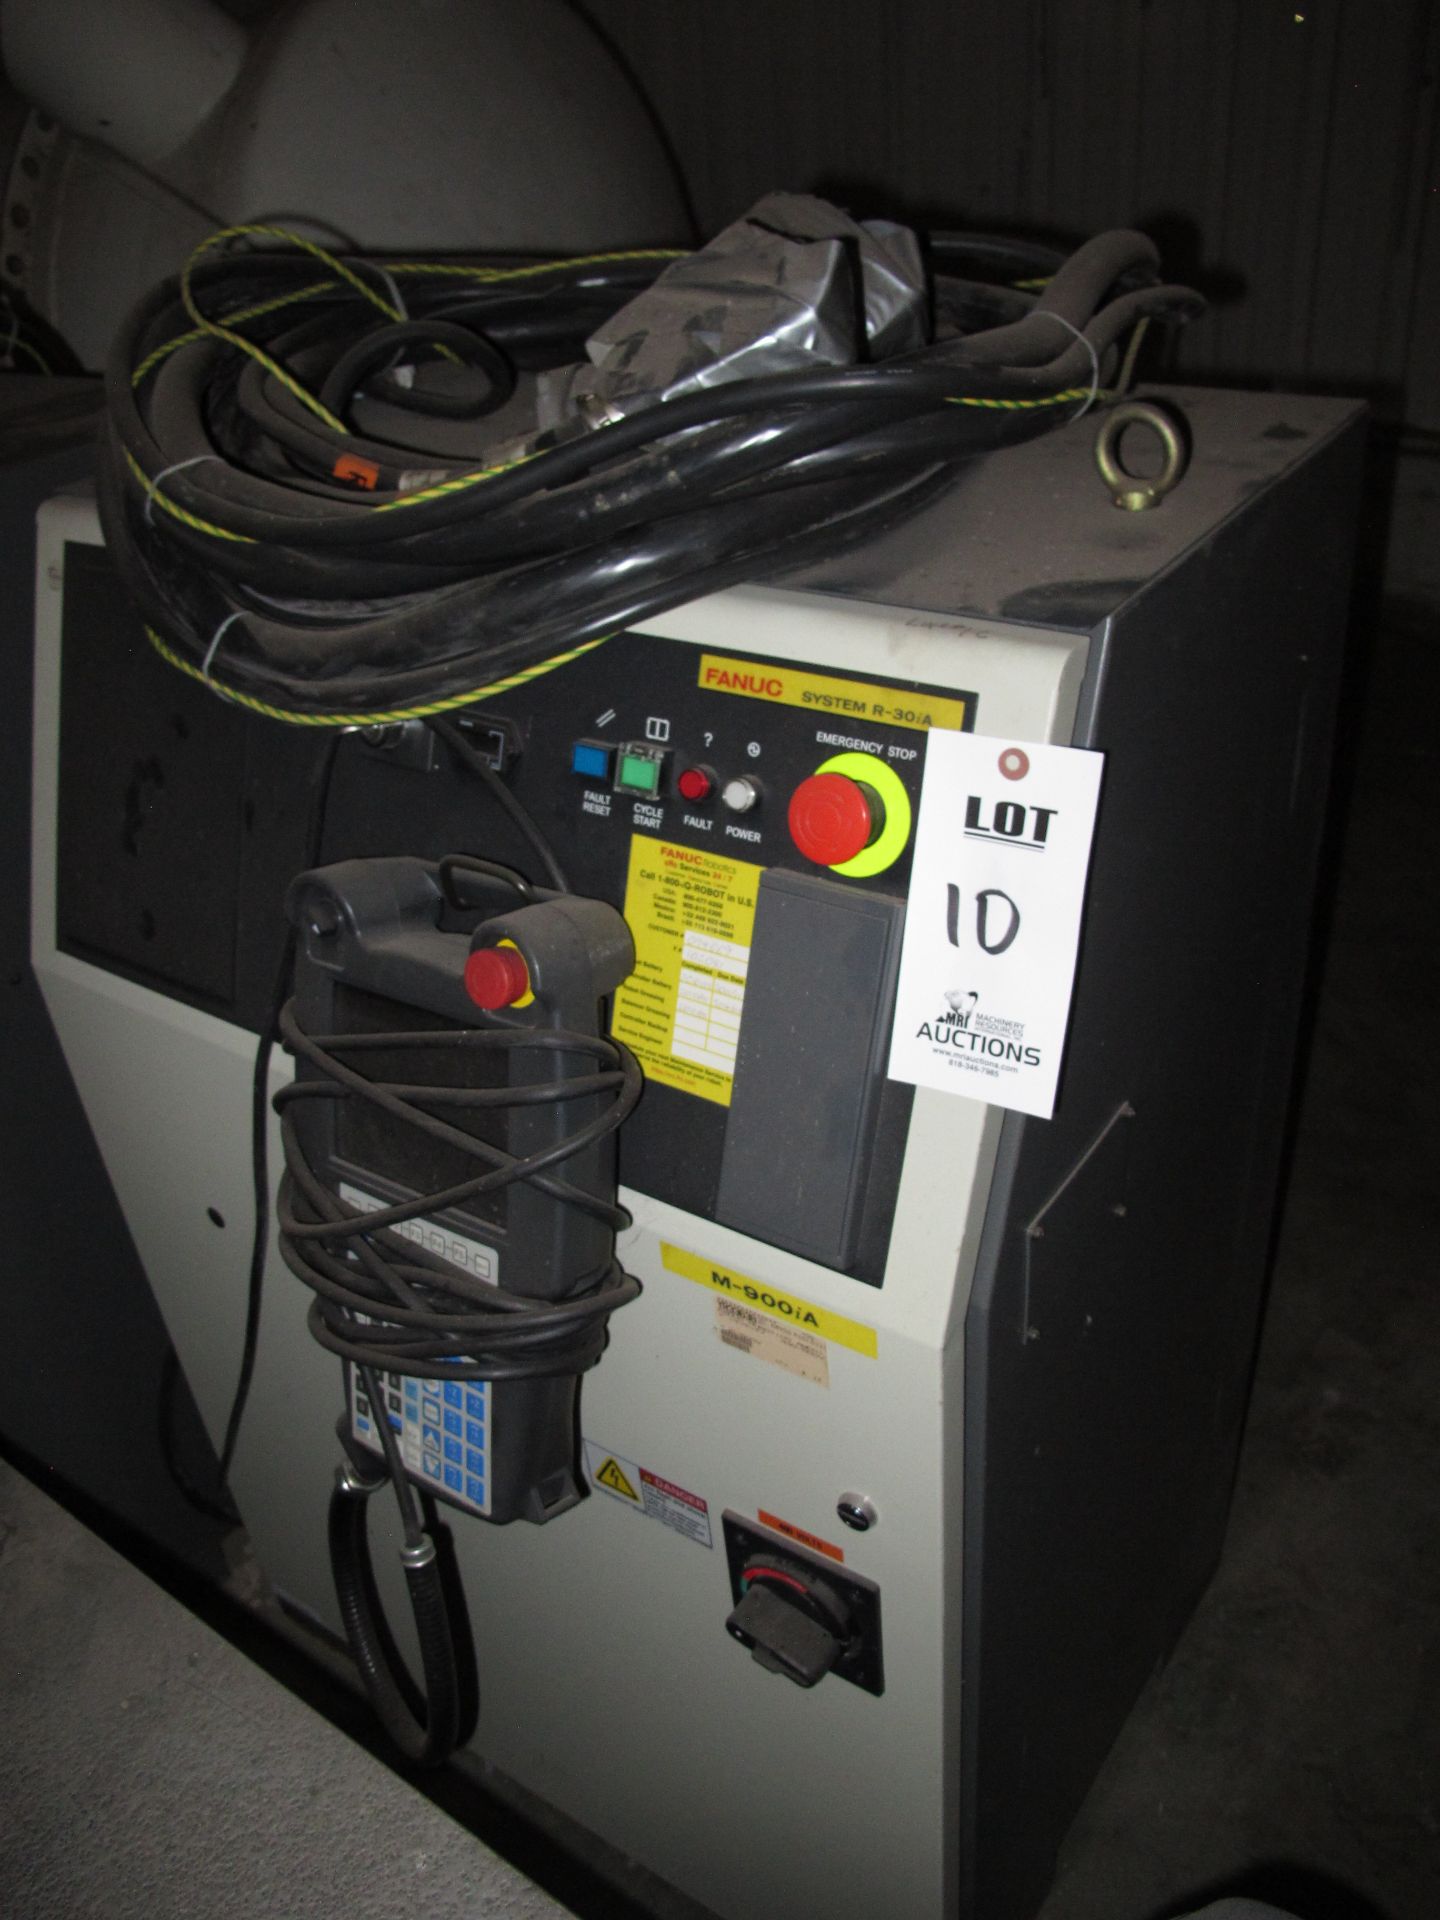 FANUC INDUSTRIAL JOINTED ARM ROBOT, MODEL M-900iA 350, TYPE A05B-1327-B501, MANUFACTURED MAY 2010 ( - Image 7 of 10